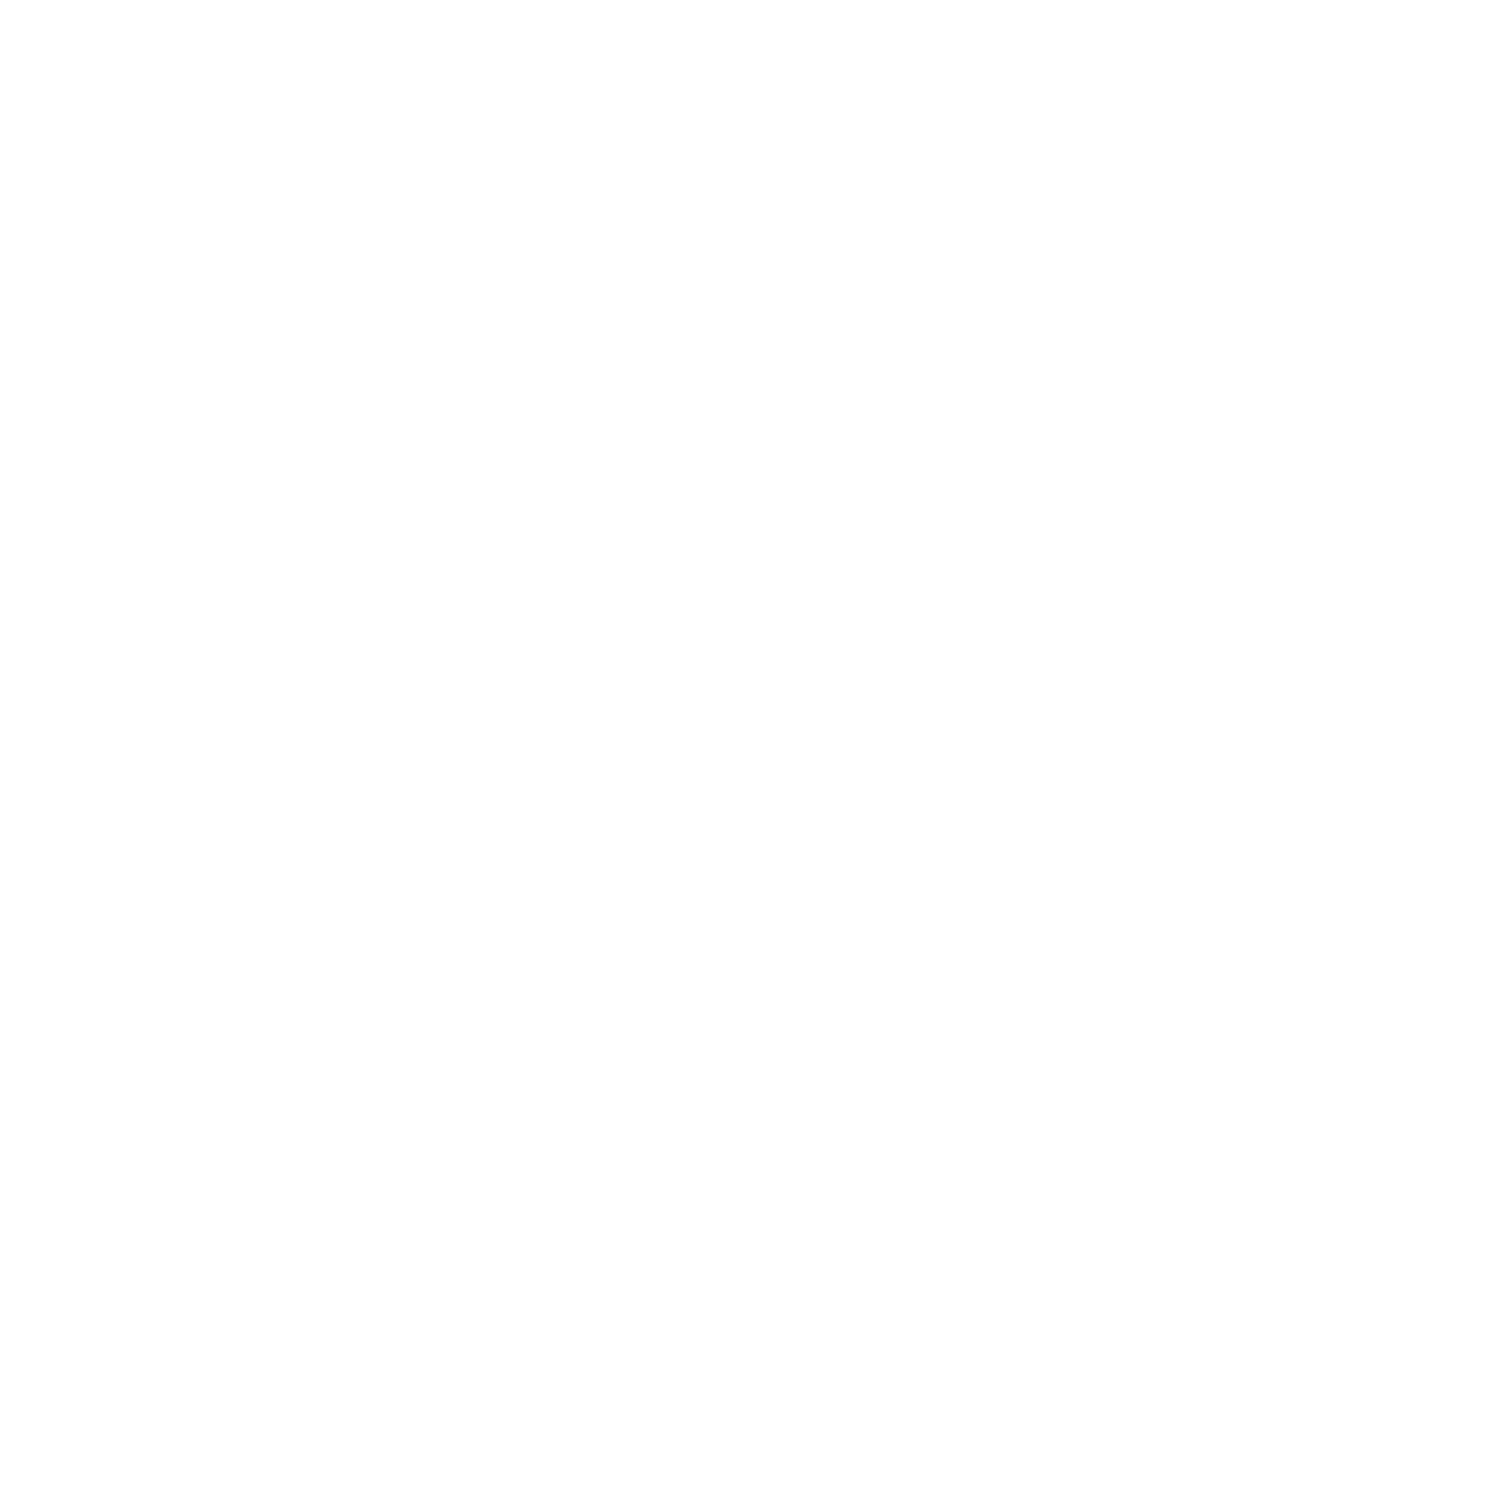 Specialist Rescue Group